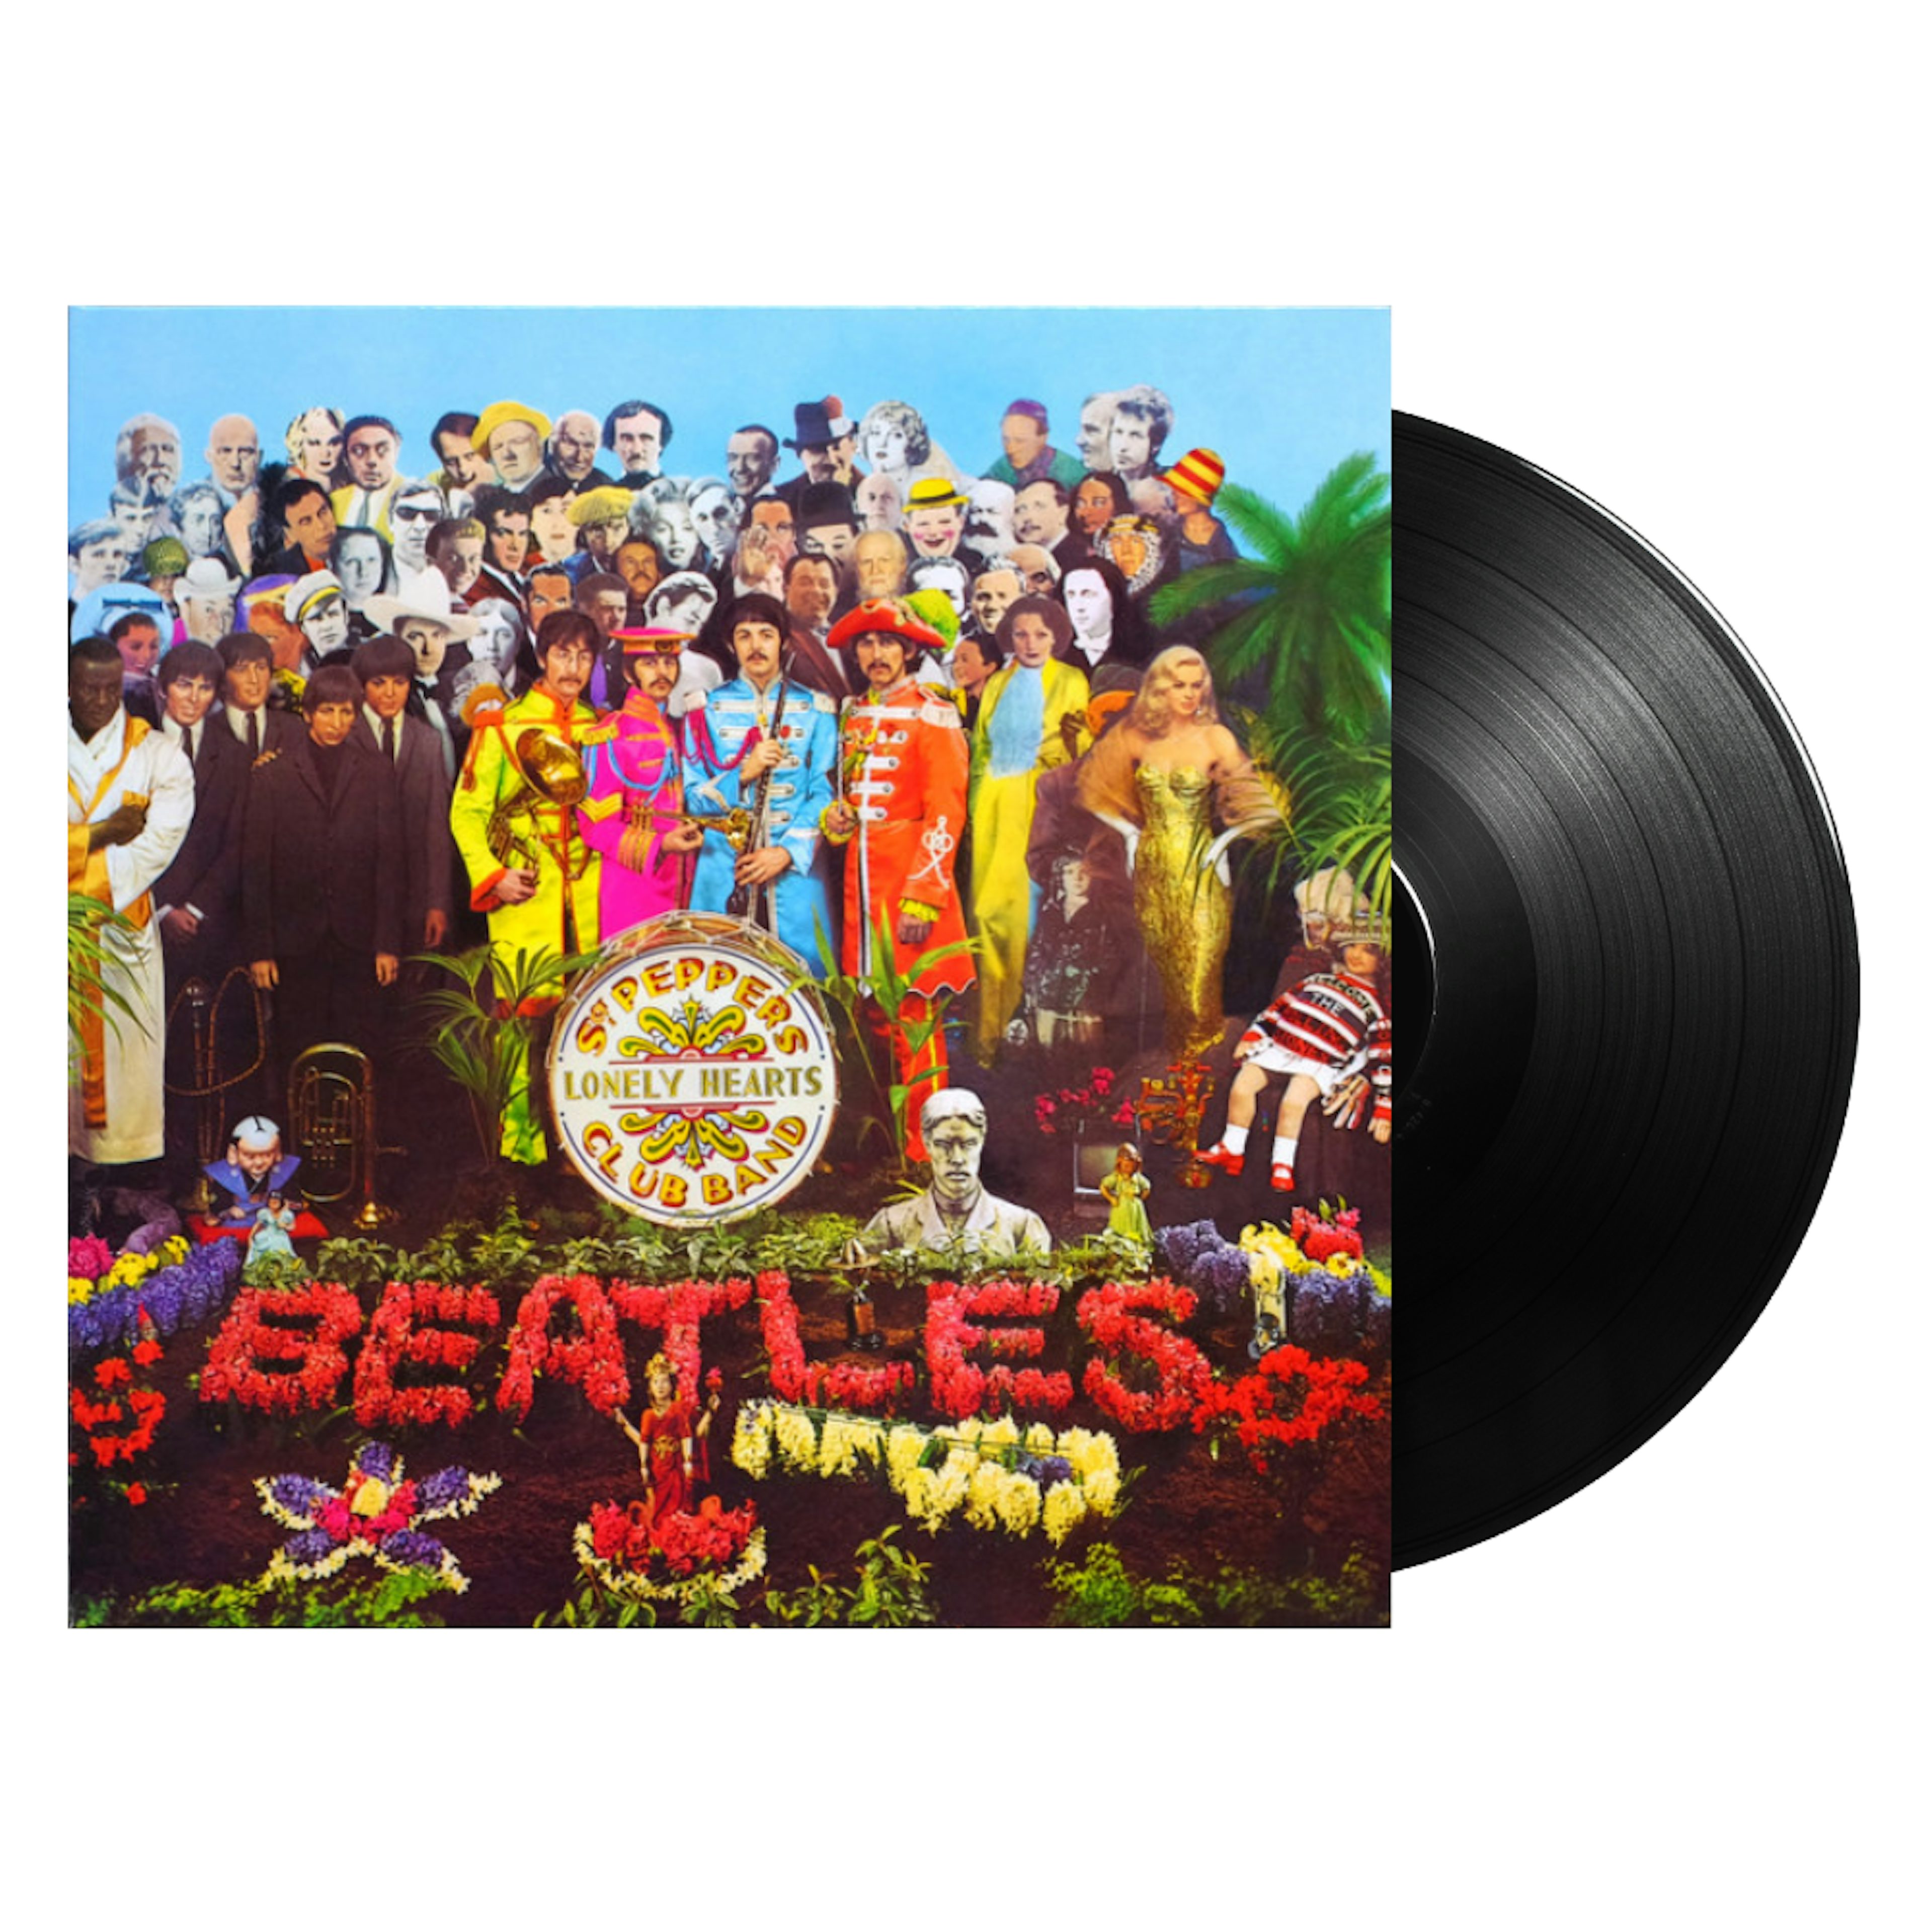 The Pepper's Lonely Hearts Band LP